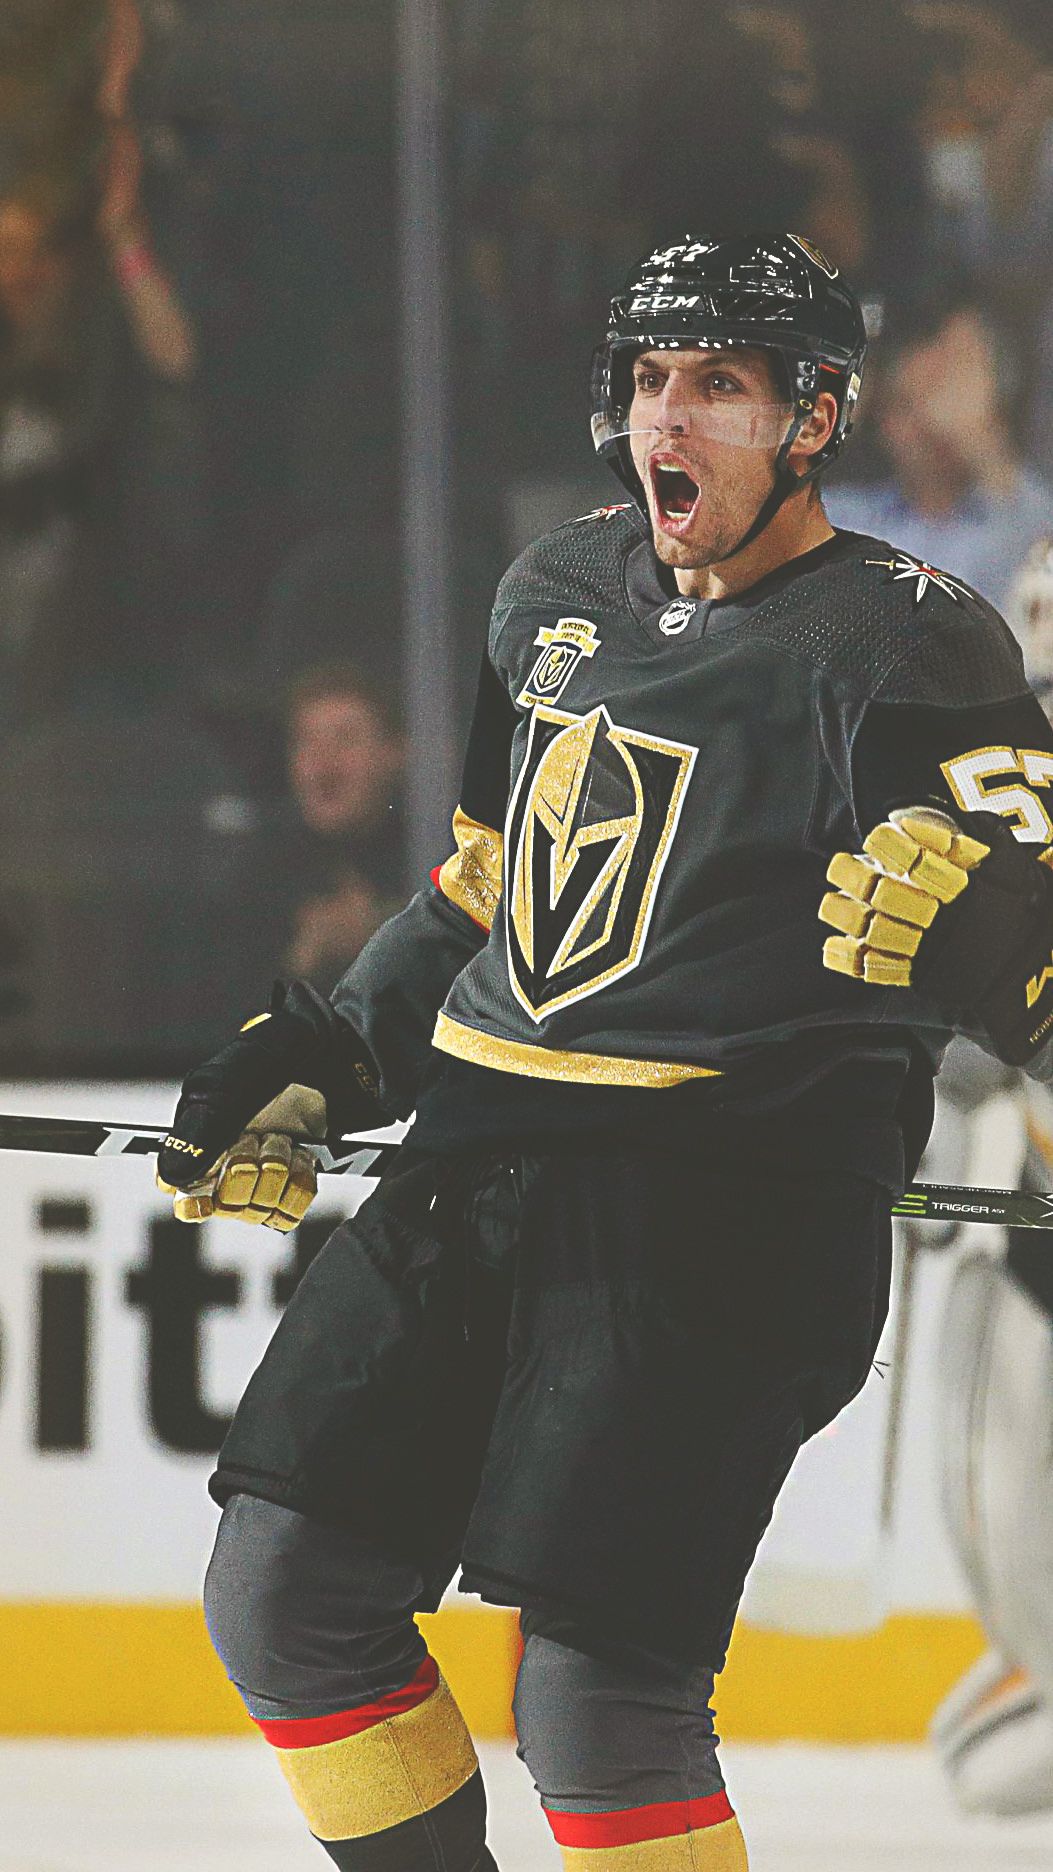 VGK iphone wallpapers i just made